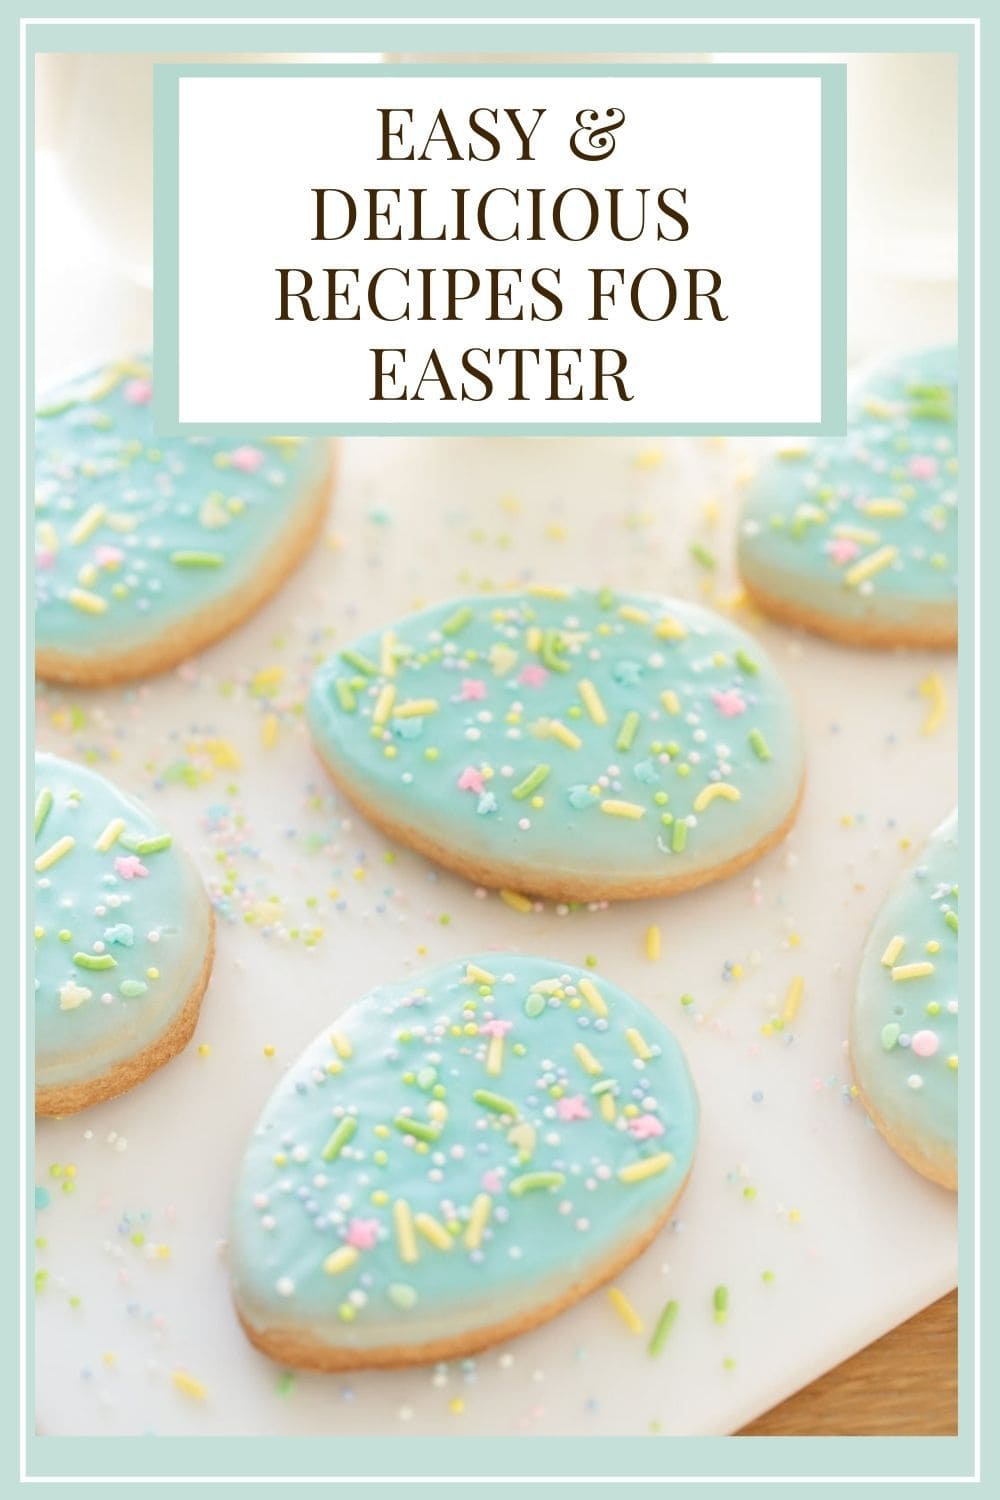 Make-Ahead Recipes for Easy, Delicious Easter Entertaining